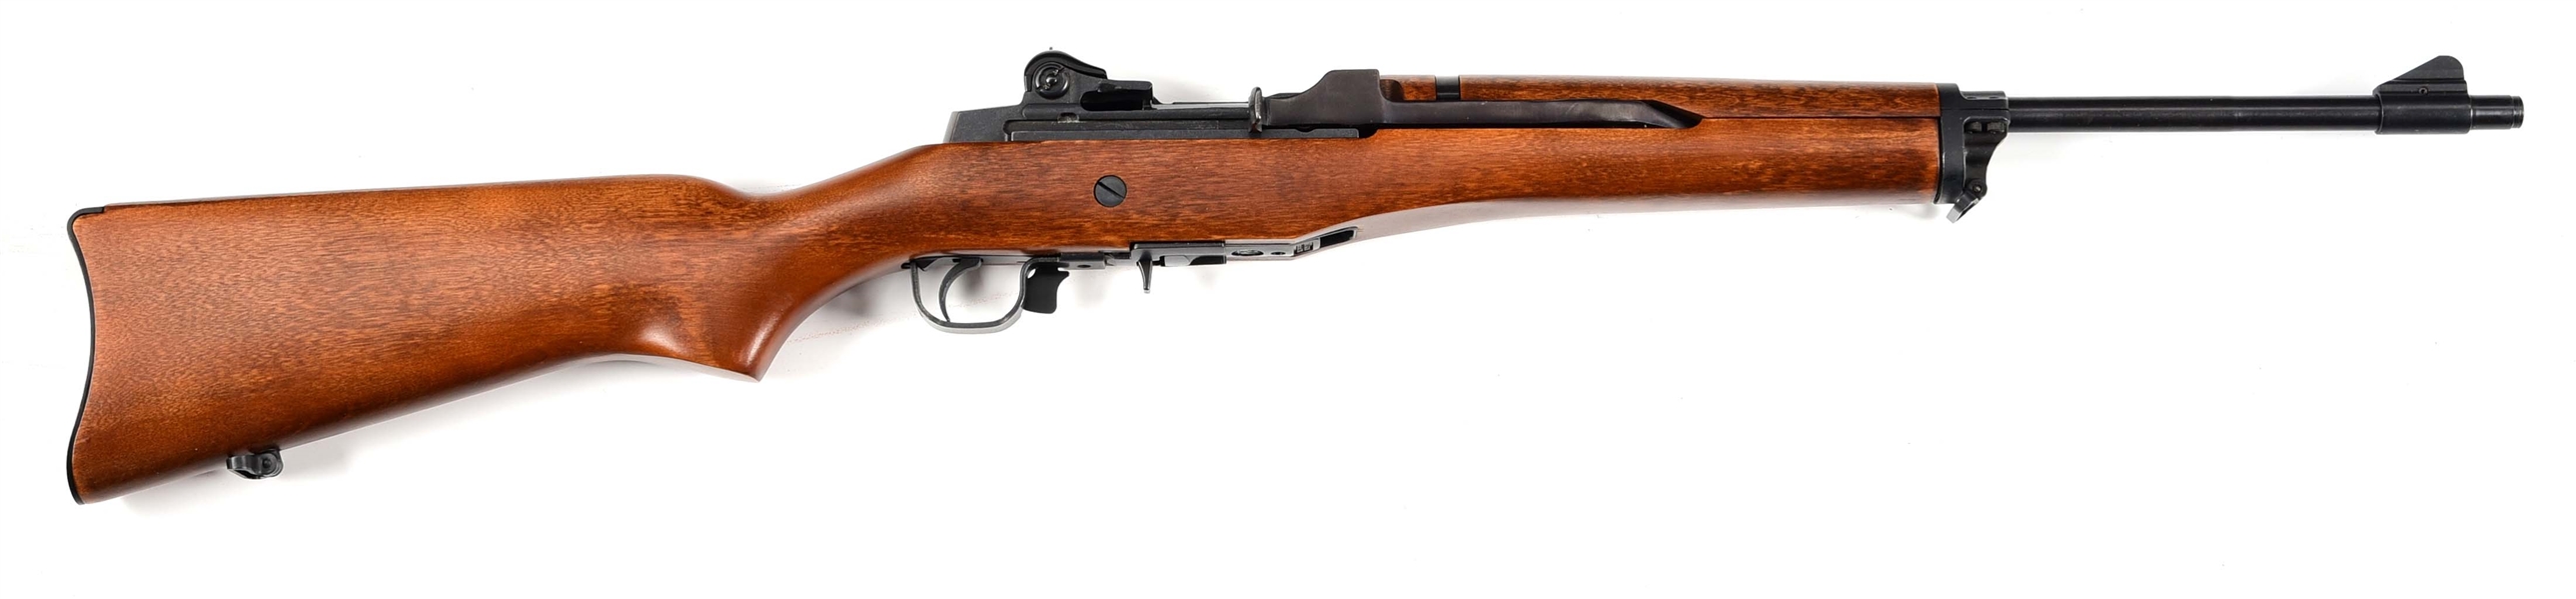 (M) EXCELLENT SECOND YEAR PRODUCTION RUGER MINI-14 (180 SERIES) SEMI-AUTOMATIC RIFLE WITH MATCHING FACTORY BOX.